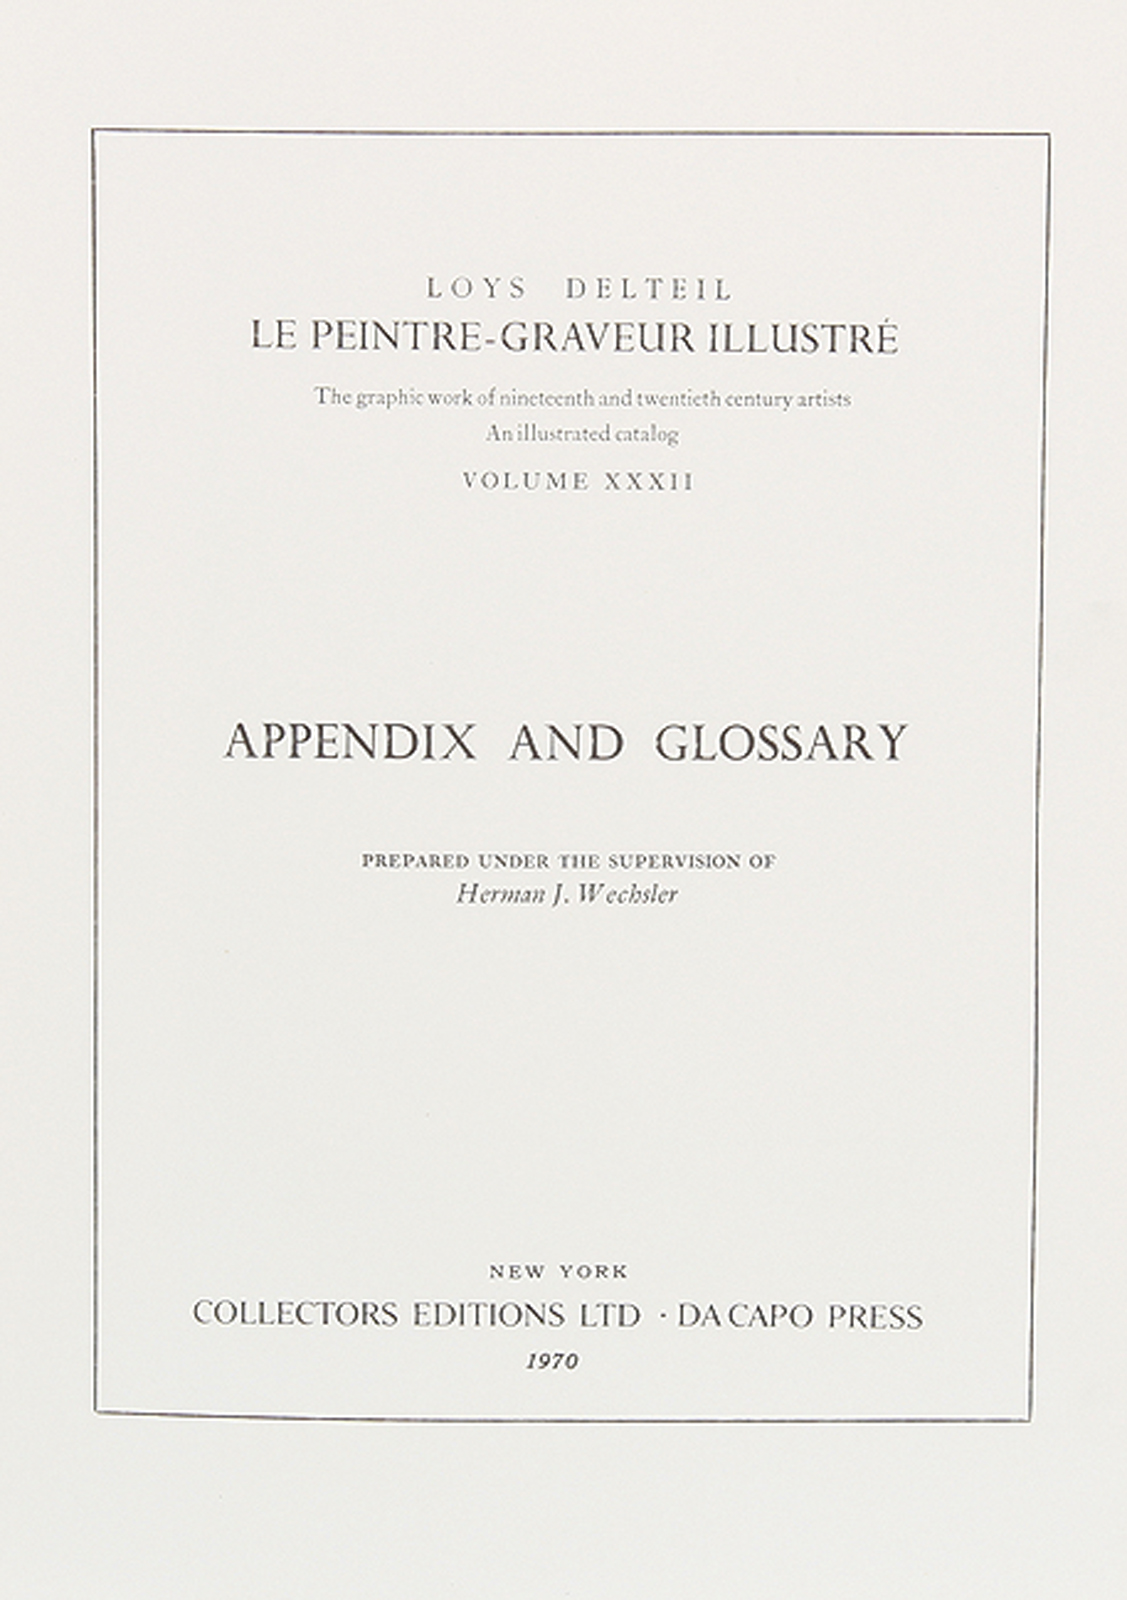 Wechsler, Herman J; Appendix and Glossary.